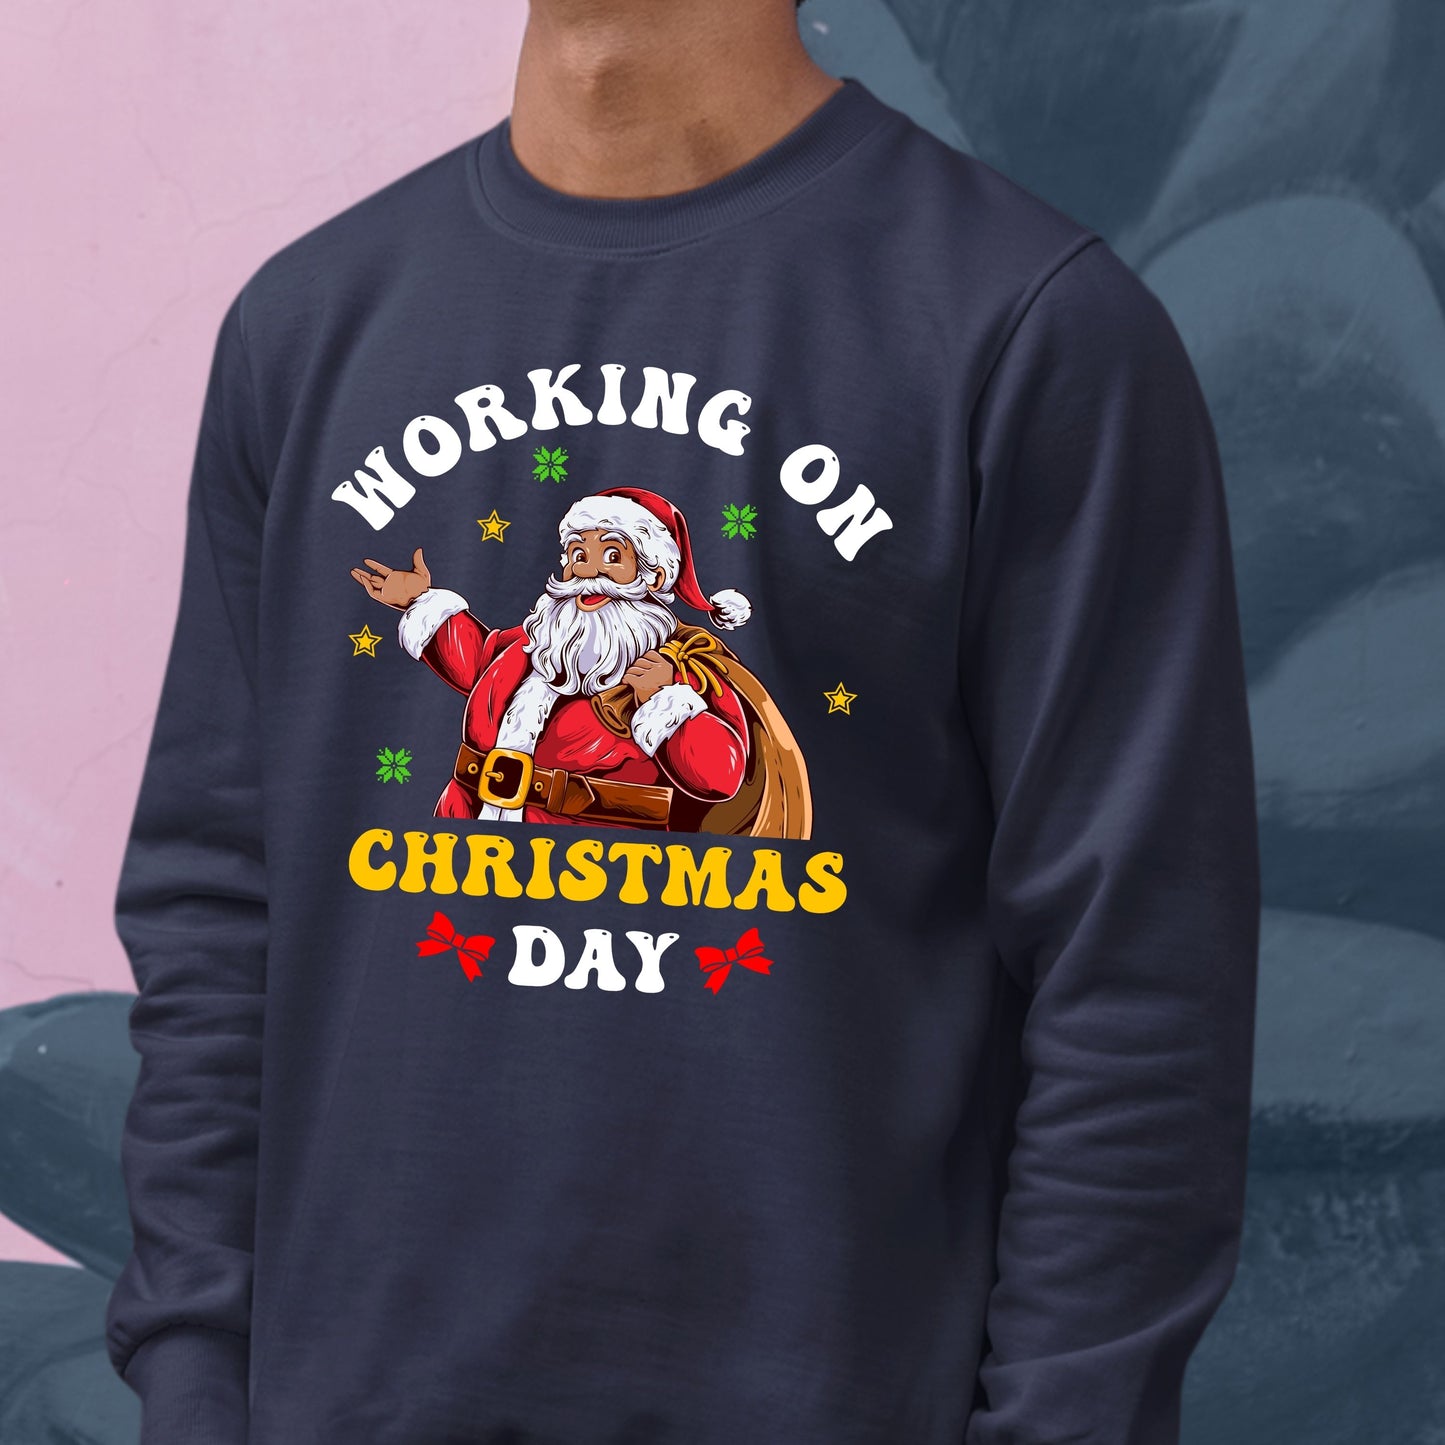 Working on Chirstmas, Youth Long Sleeve, Christmas Clothing, Christmas Sweatshirts, Christmas Shirts, Christmas Decor, Christmas